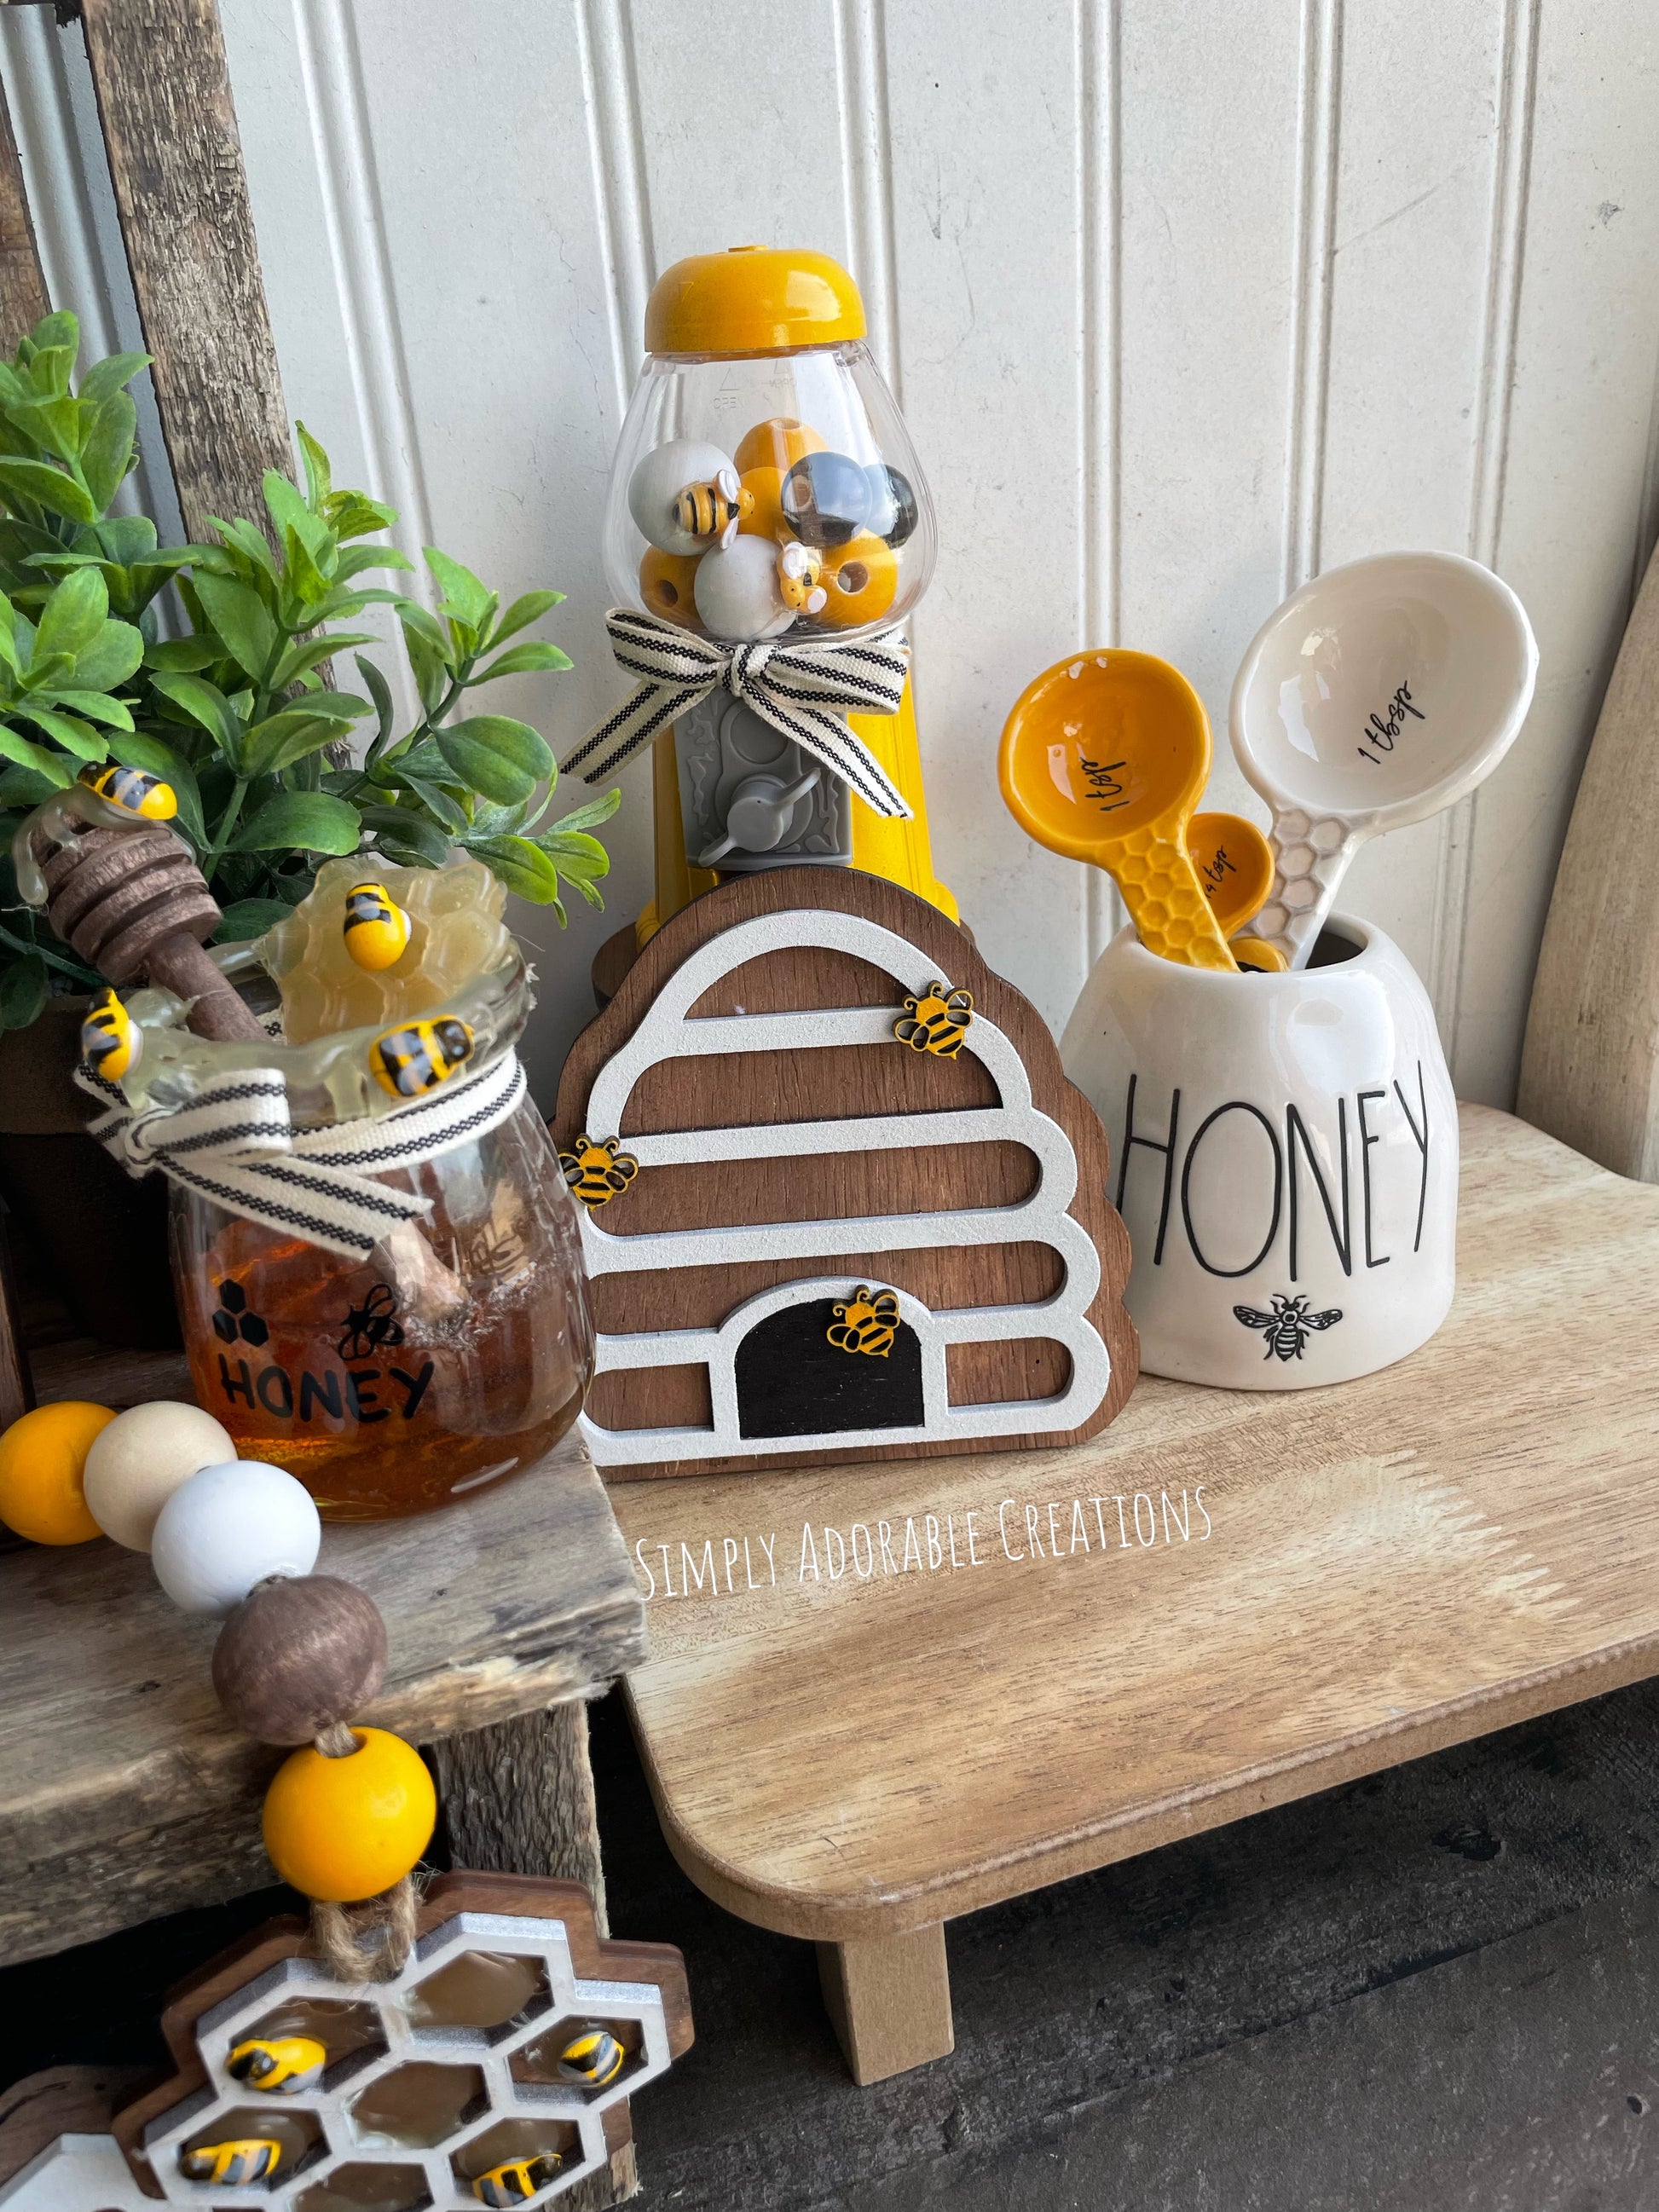 QUEEN BEE HONEY MINI SIGN TIERED TRAY SPRING SUMMER HOME KITCHEN BEE DECOR